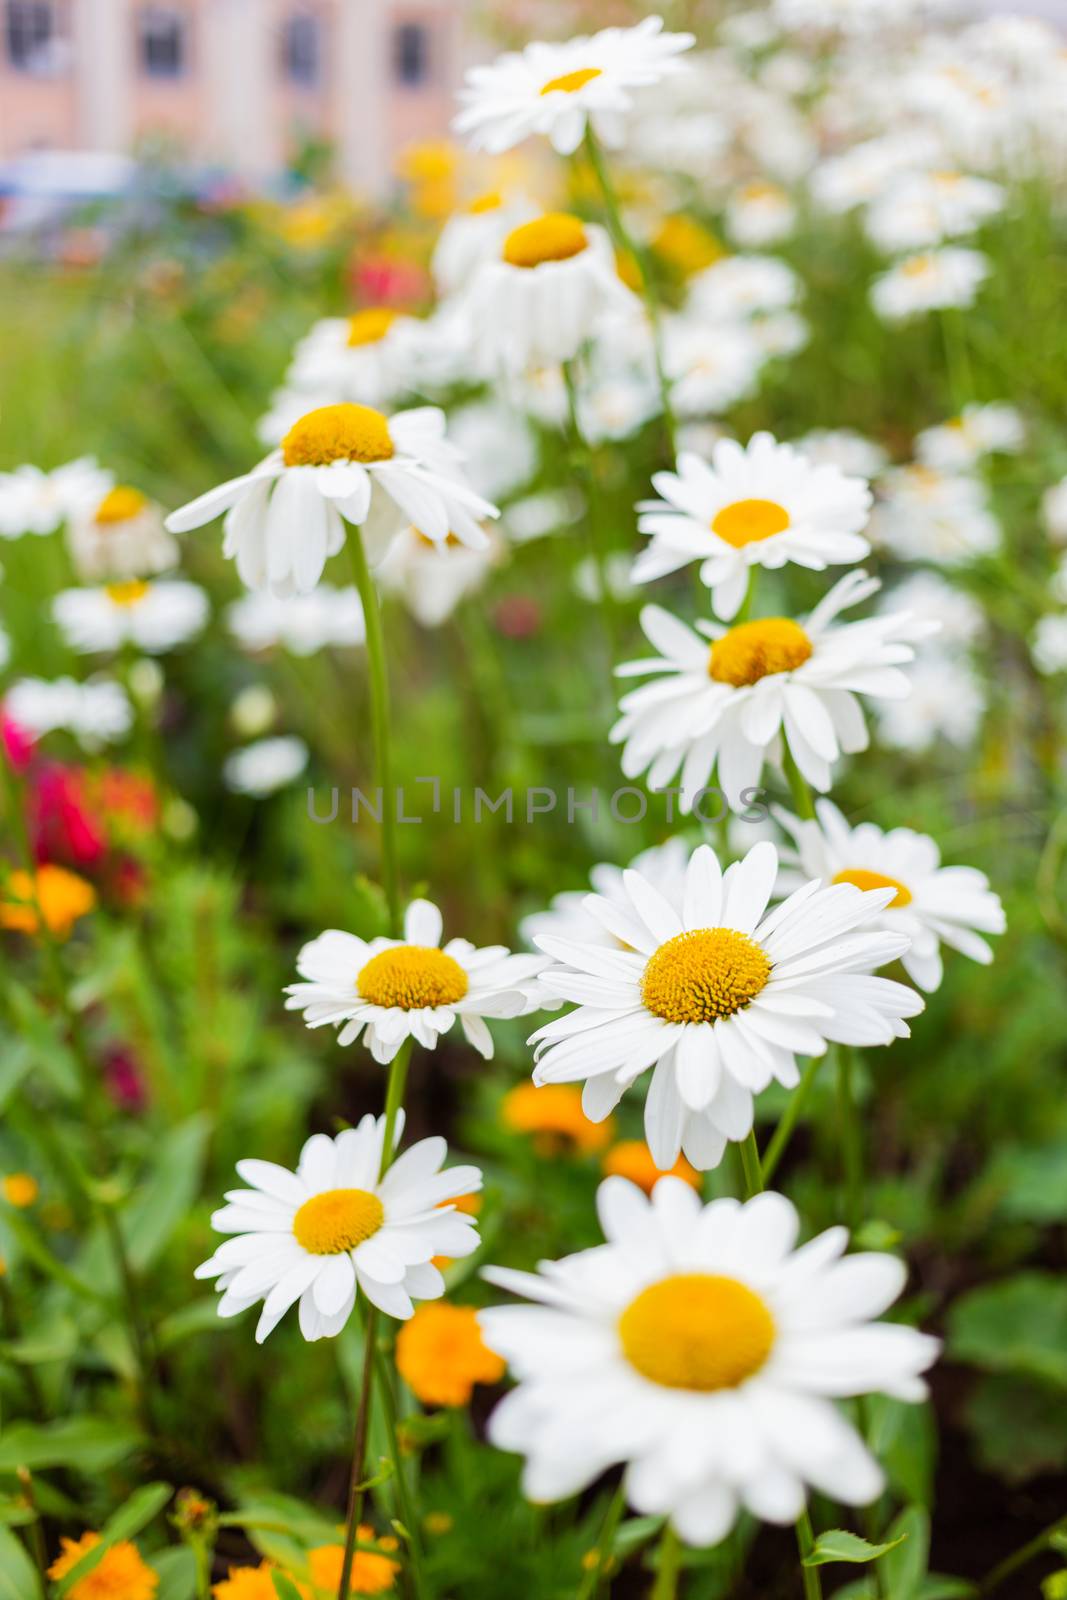 Lawn with blooming daisies. Flower bed in urban environment. Moscow, Russia. by aksenovko